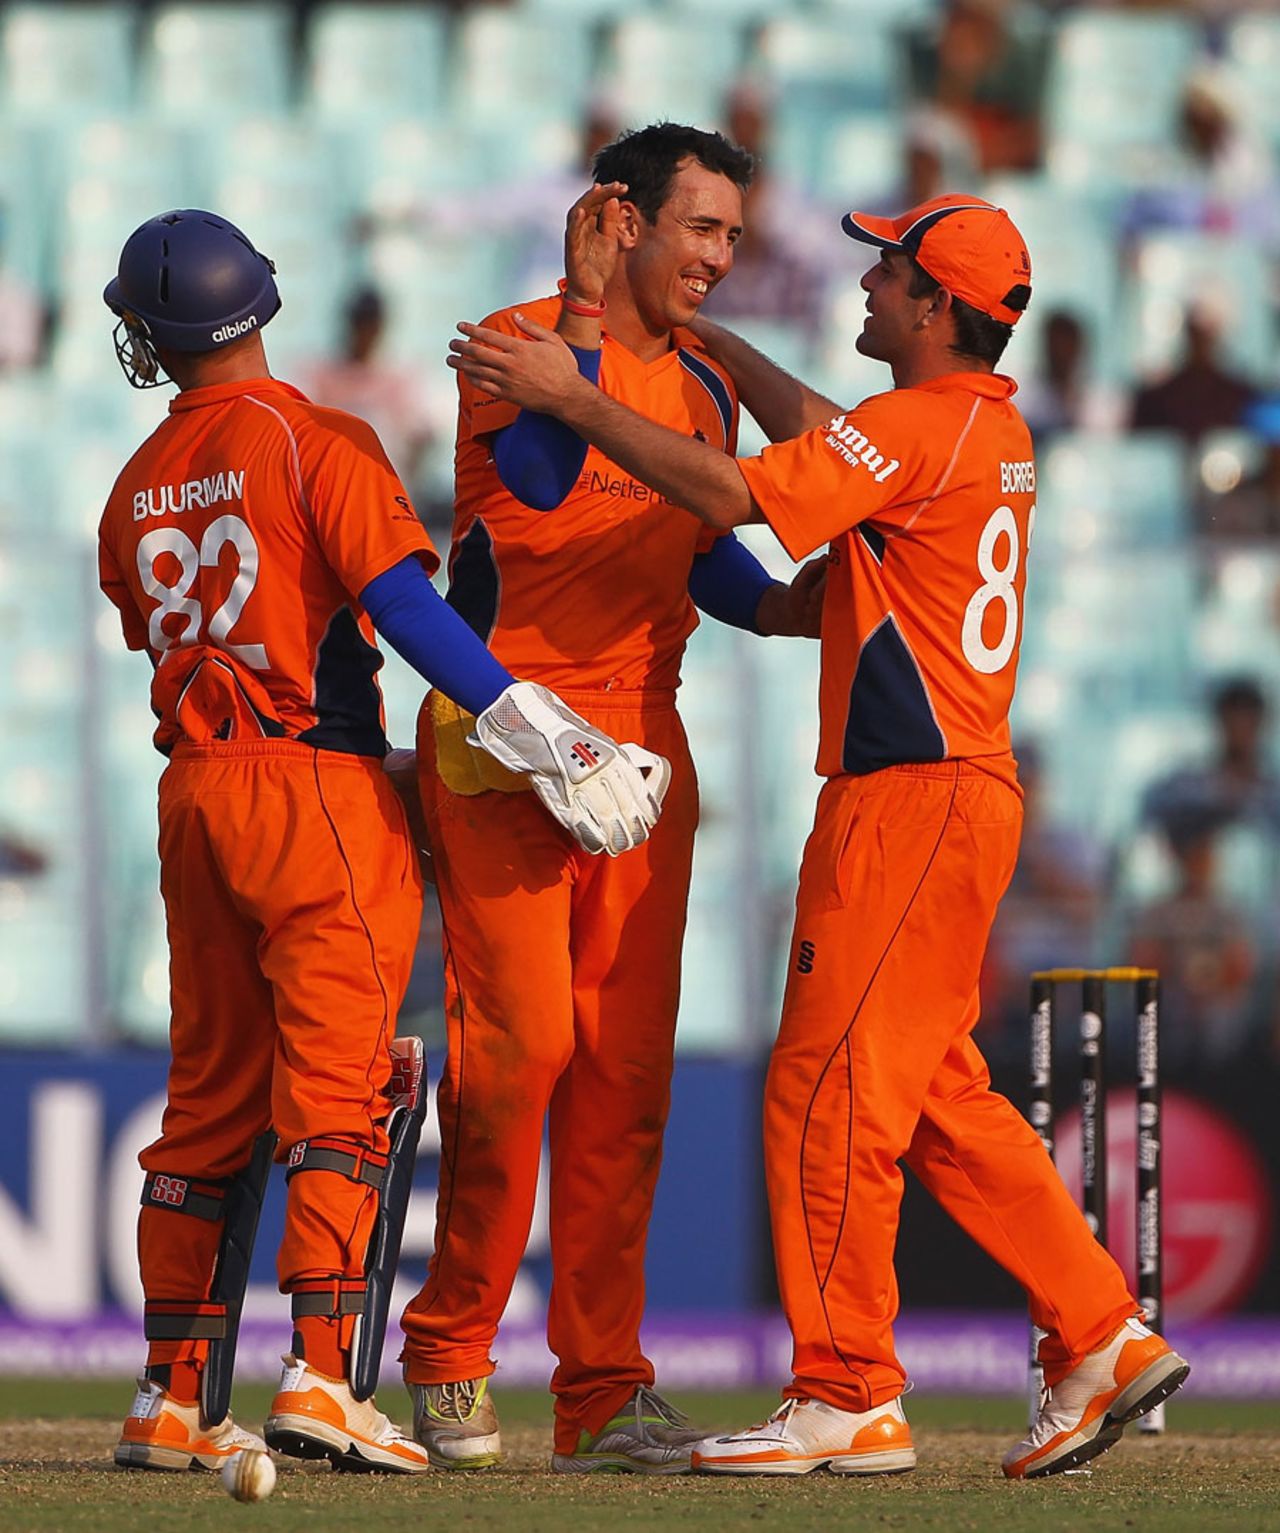 Tom Cooper is congratulated by team-mates on his dismissal of Ed Joyce, Ireland v Netherlands, World Cup 2011, Group B, March 18, 2011